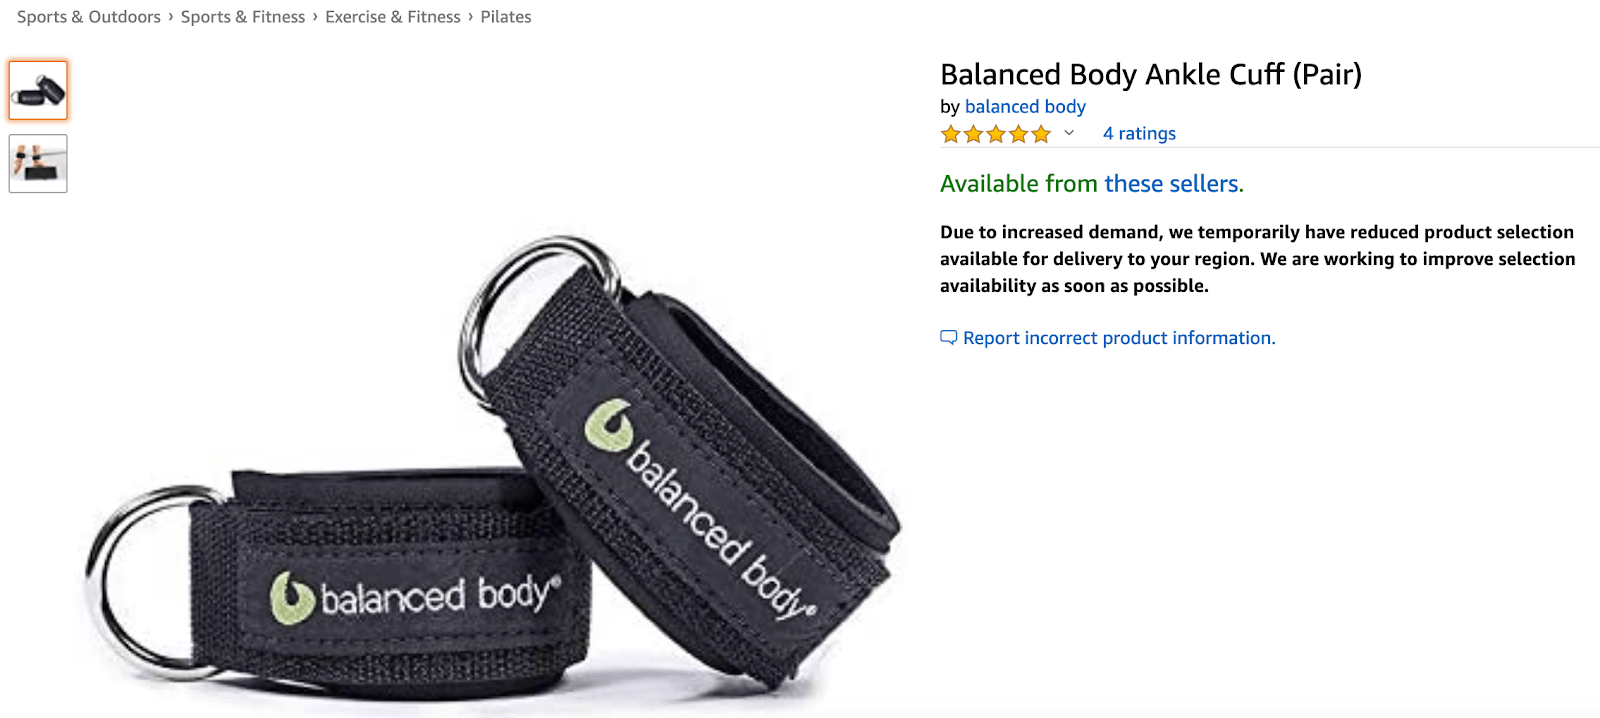 Amazon product listing: example of a poor product title